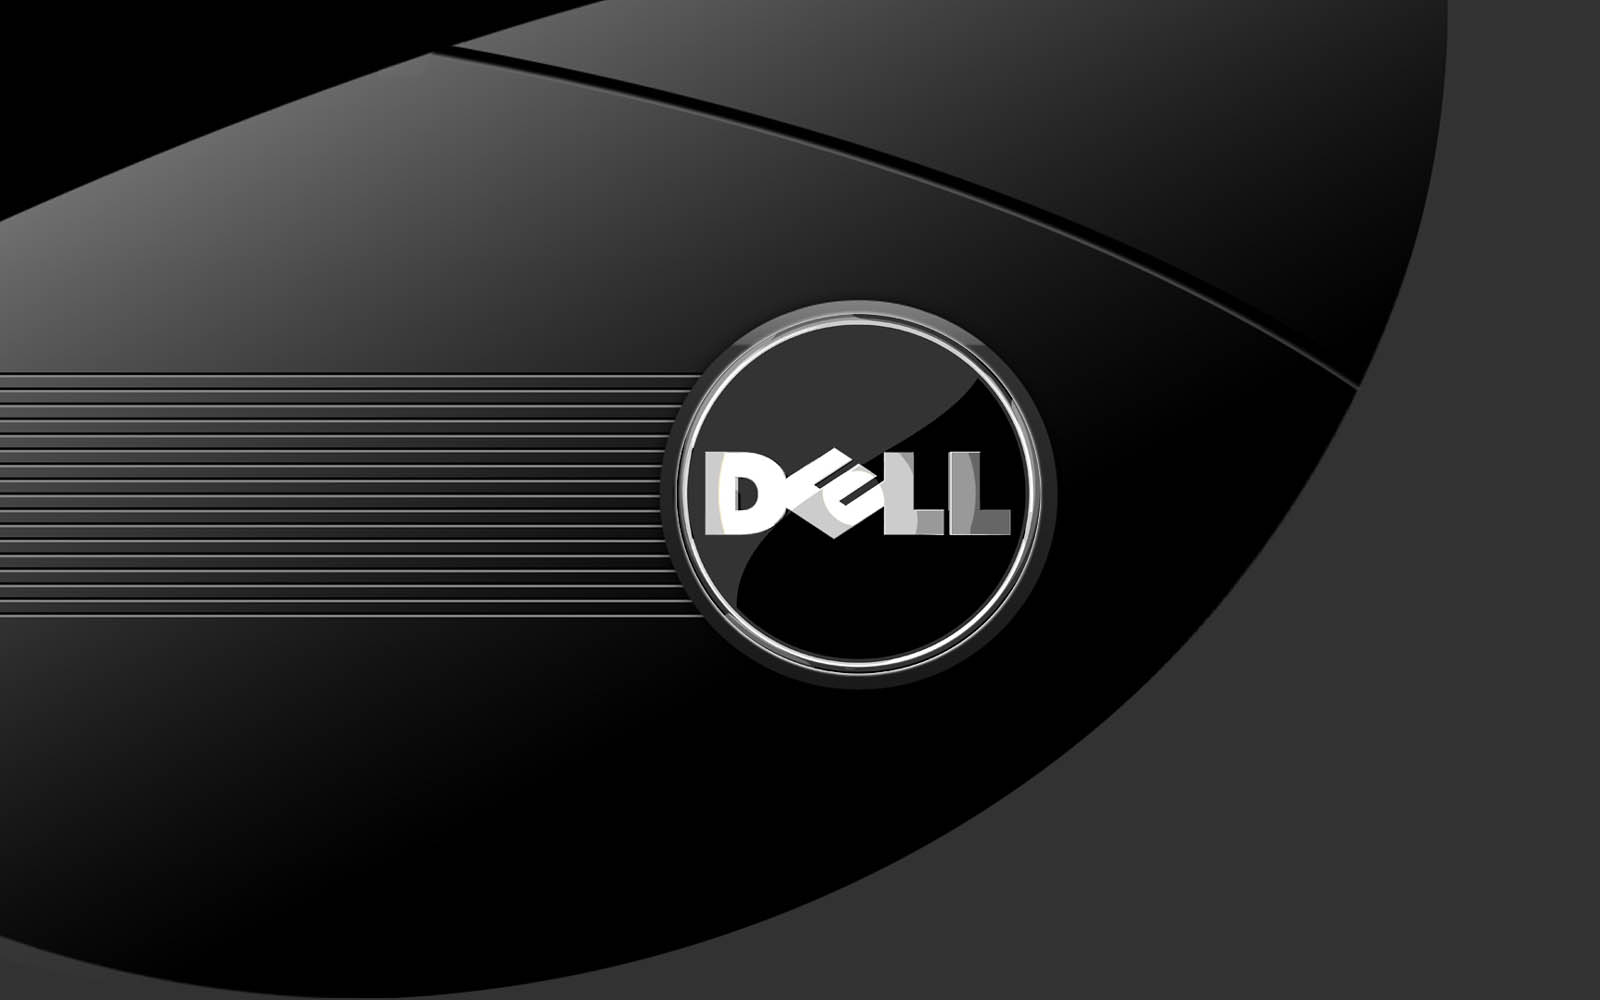 Dell Wallpaper Background On